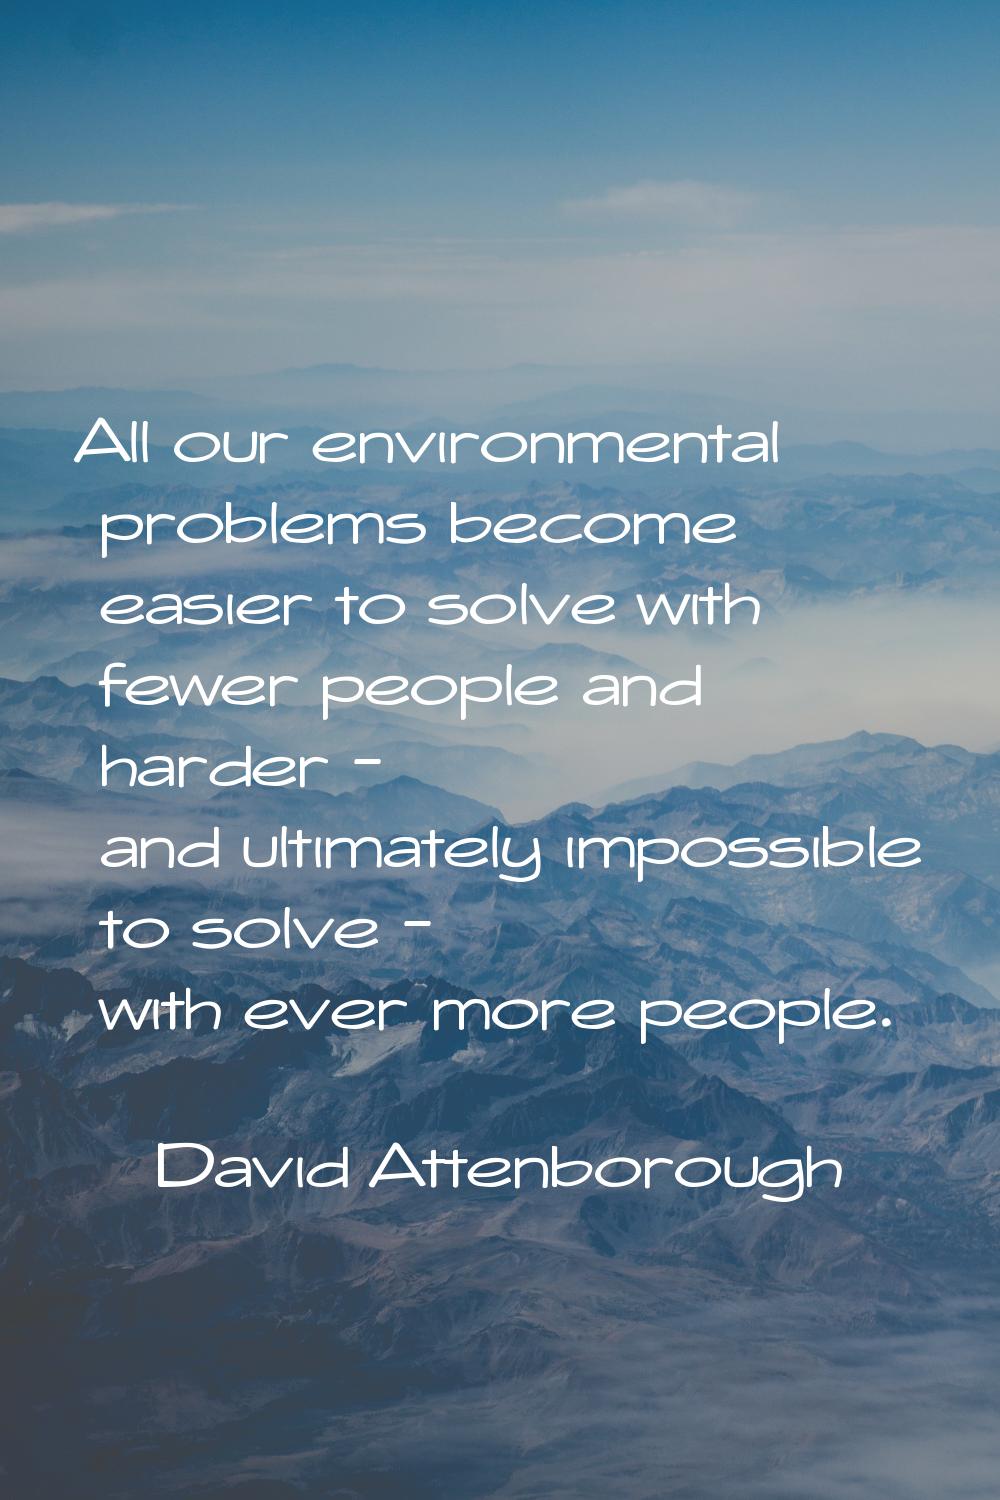 All our environmental problems become easier to solve with fewer people and harder - and ultimately